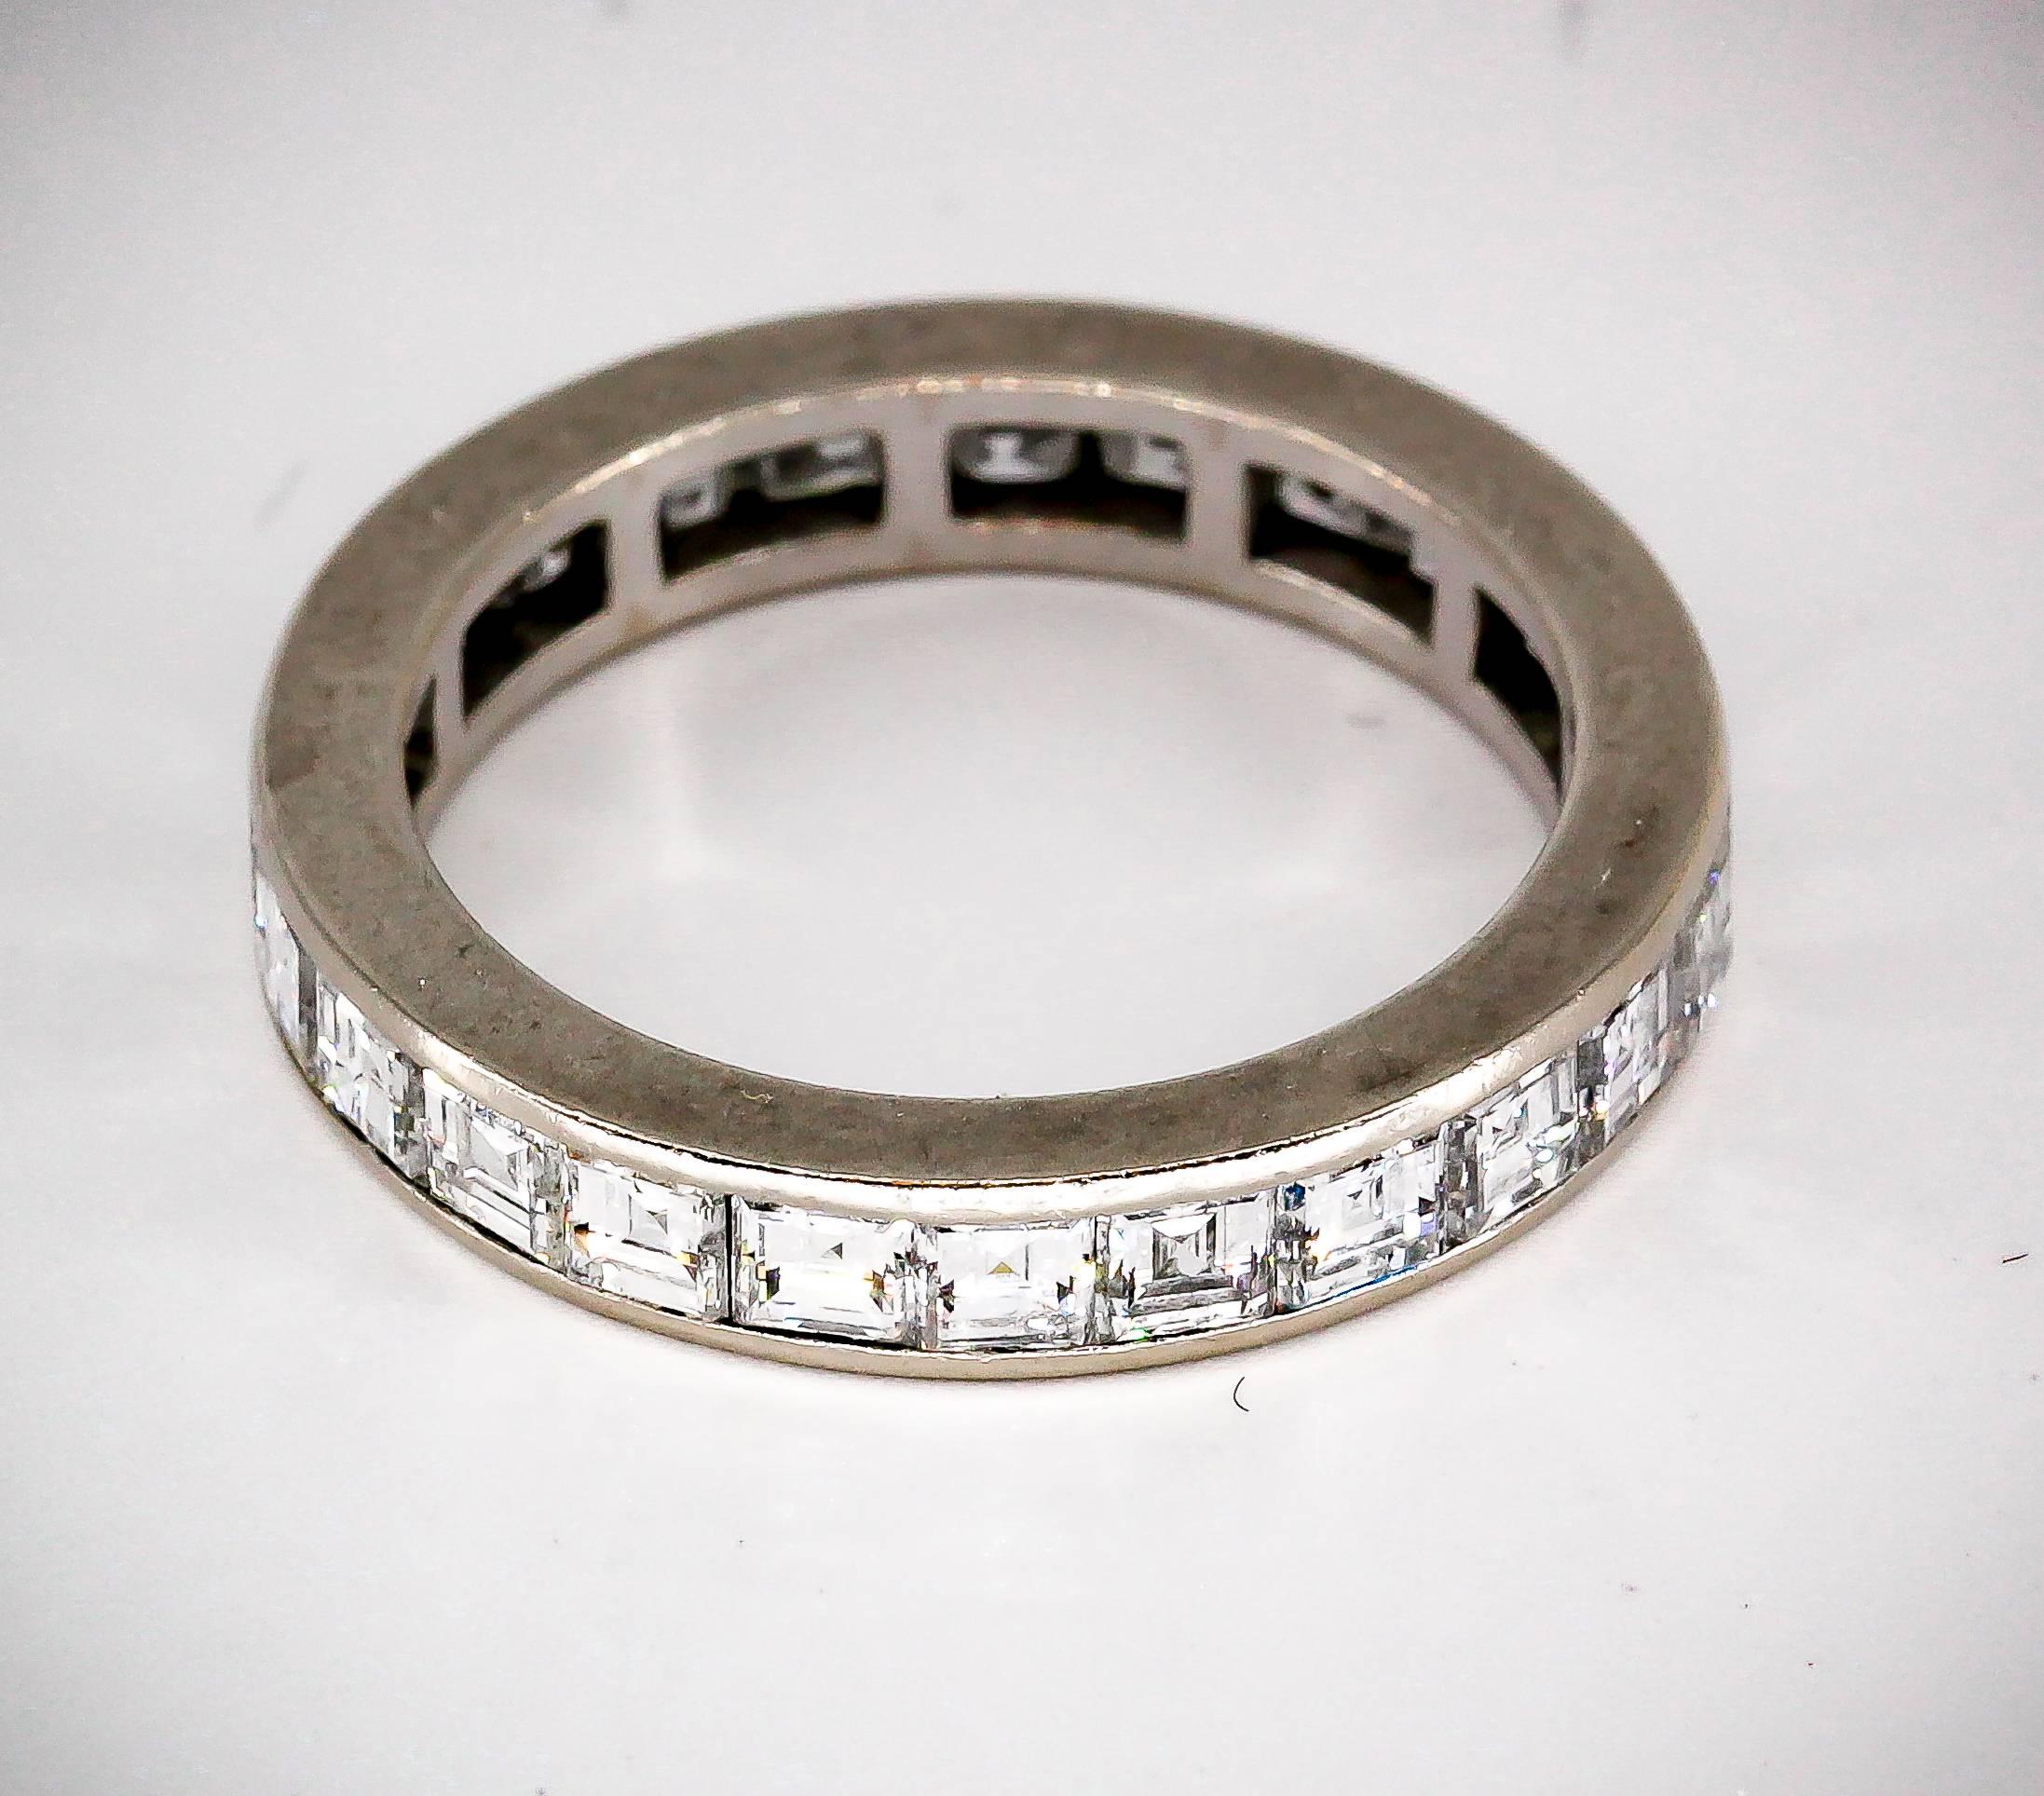 Chic diamond and 18K white gold band by Gubelin. It features 24 high grade square cut diamonds in a channel setting, approx. 3.0 carats of F-G color VVs-Vs clarity diamonds. Size 8.

Hallmarks: Gubelin maker's mark, 750.